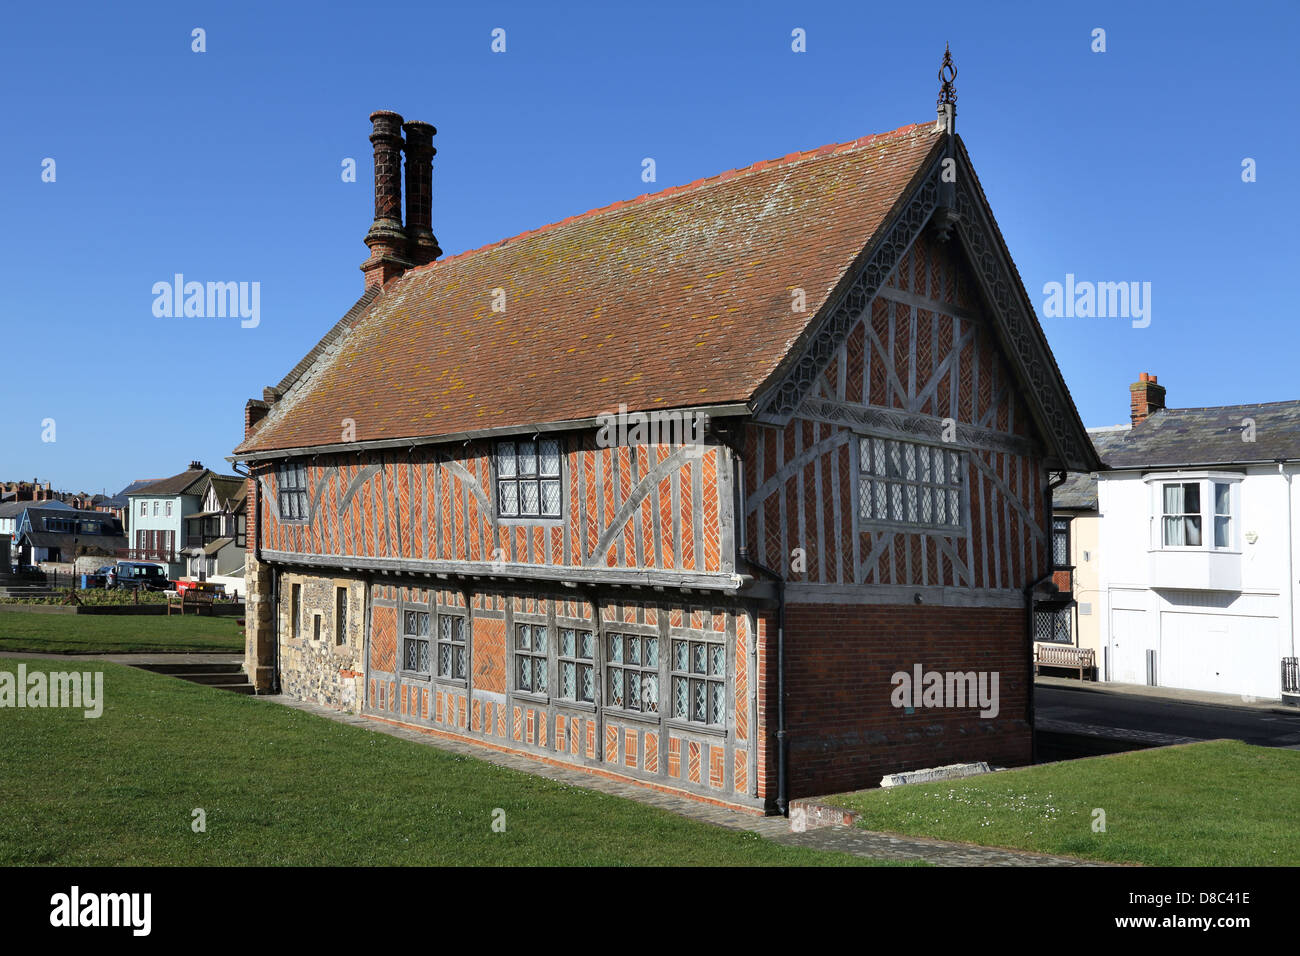 moot hall at aldeburgh on the suffolk coast Stock Photo